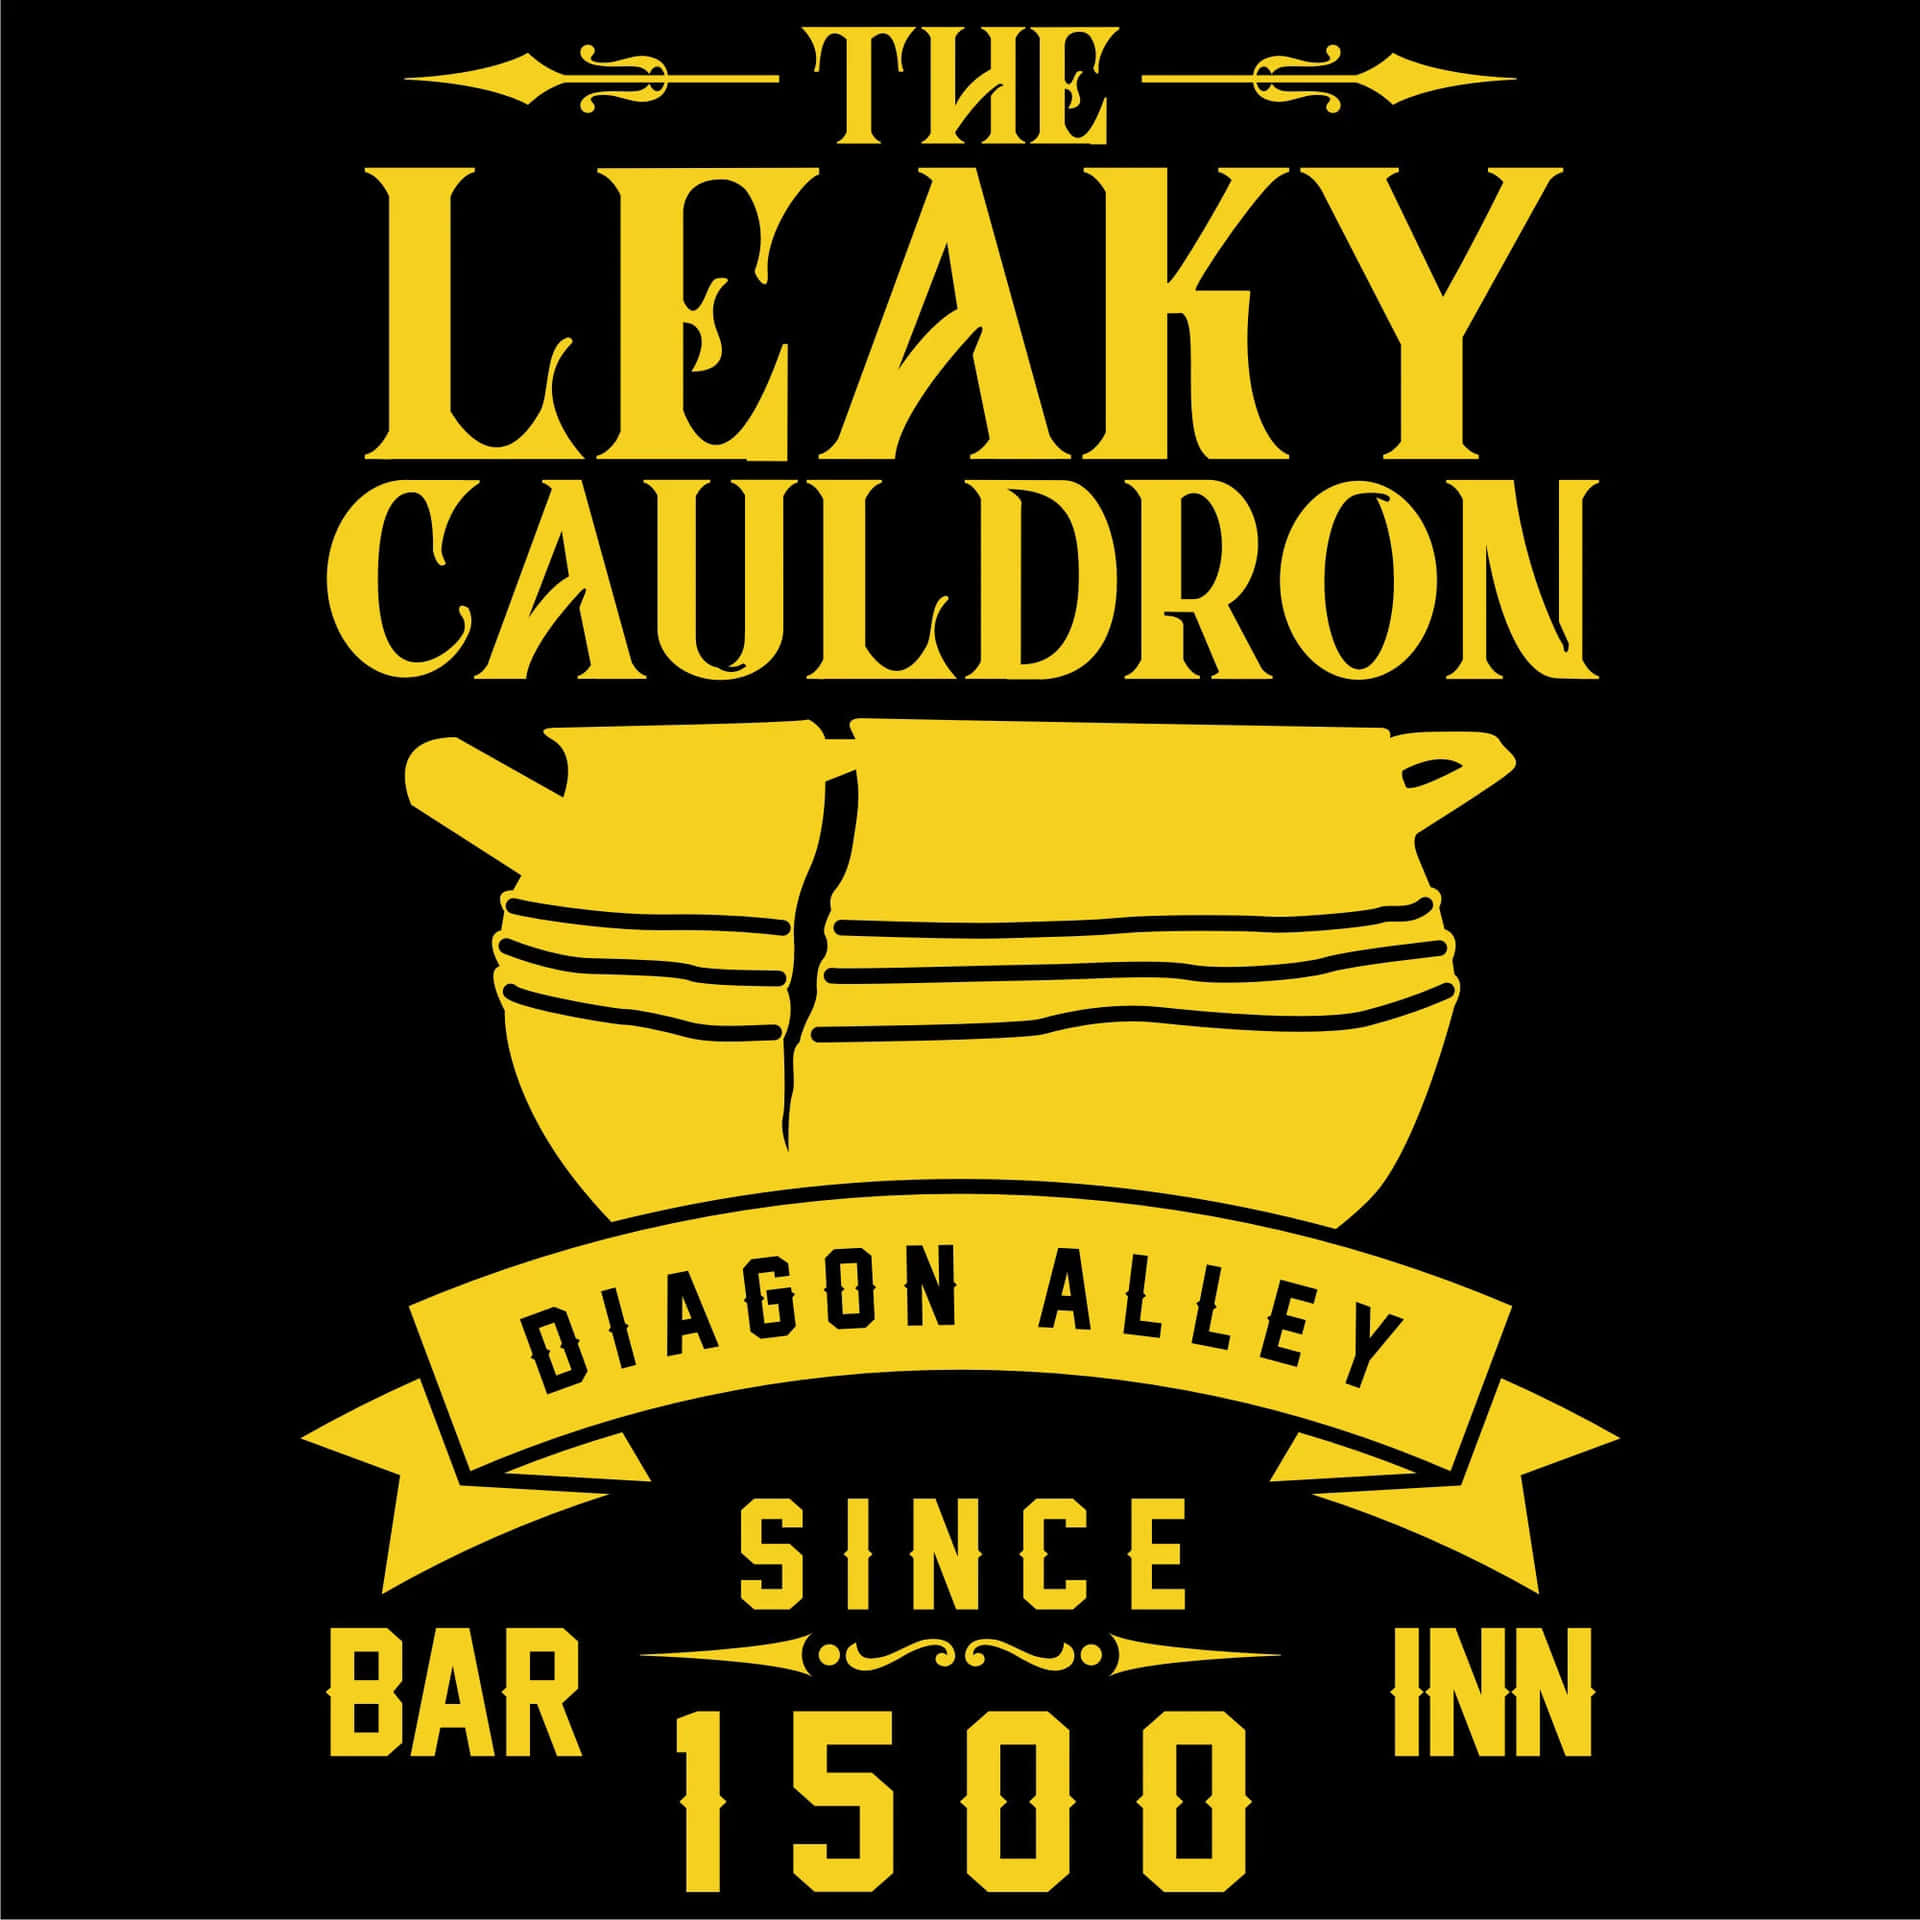 Visit The Leaky Cauldron in London's Diagon Alley Wallpaper